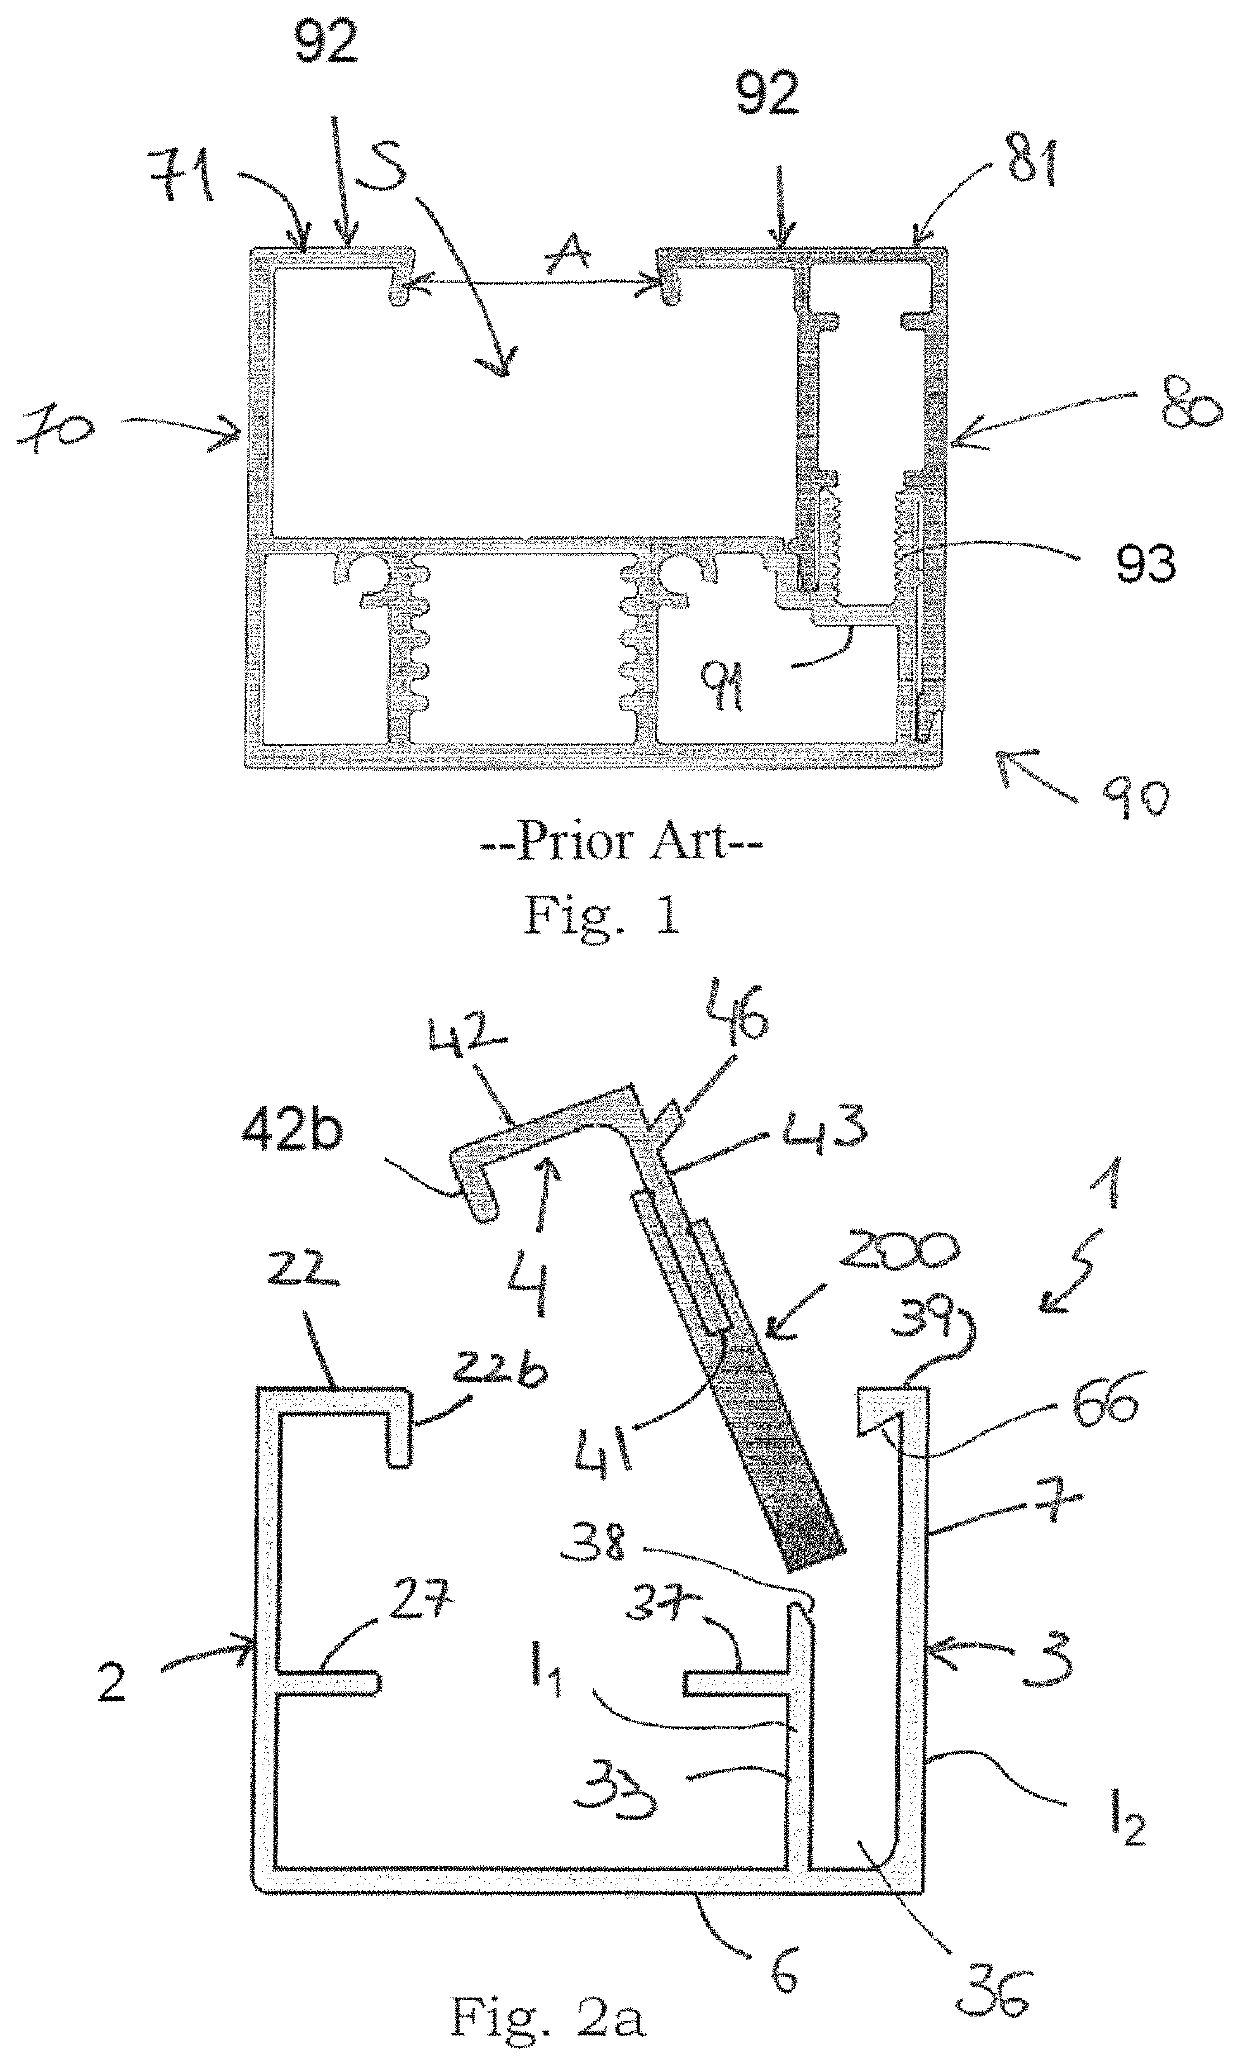 Upright for a shading system, removable flange of the upright and corresponding coupling means